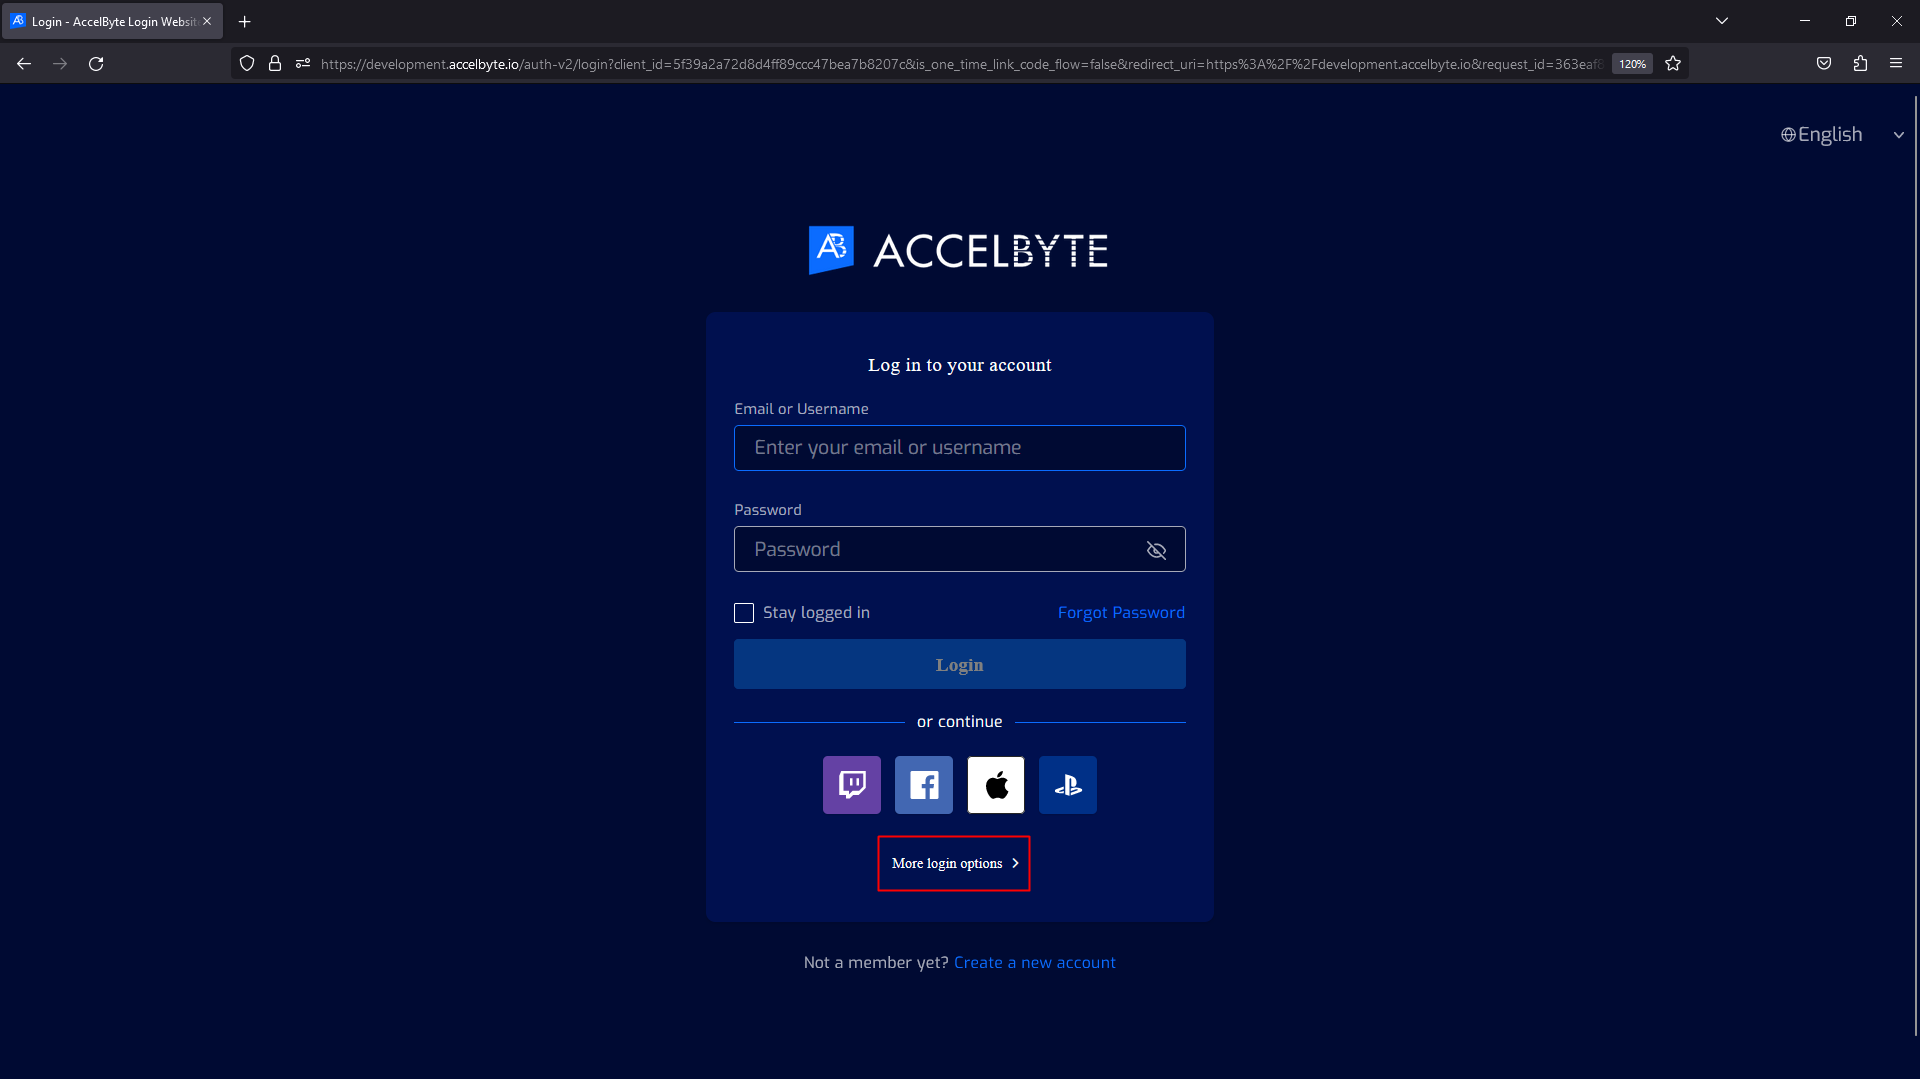 AccelByte Player Portal more login options